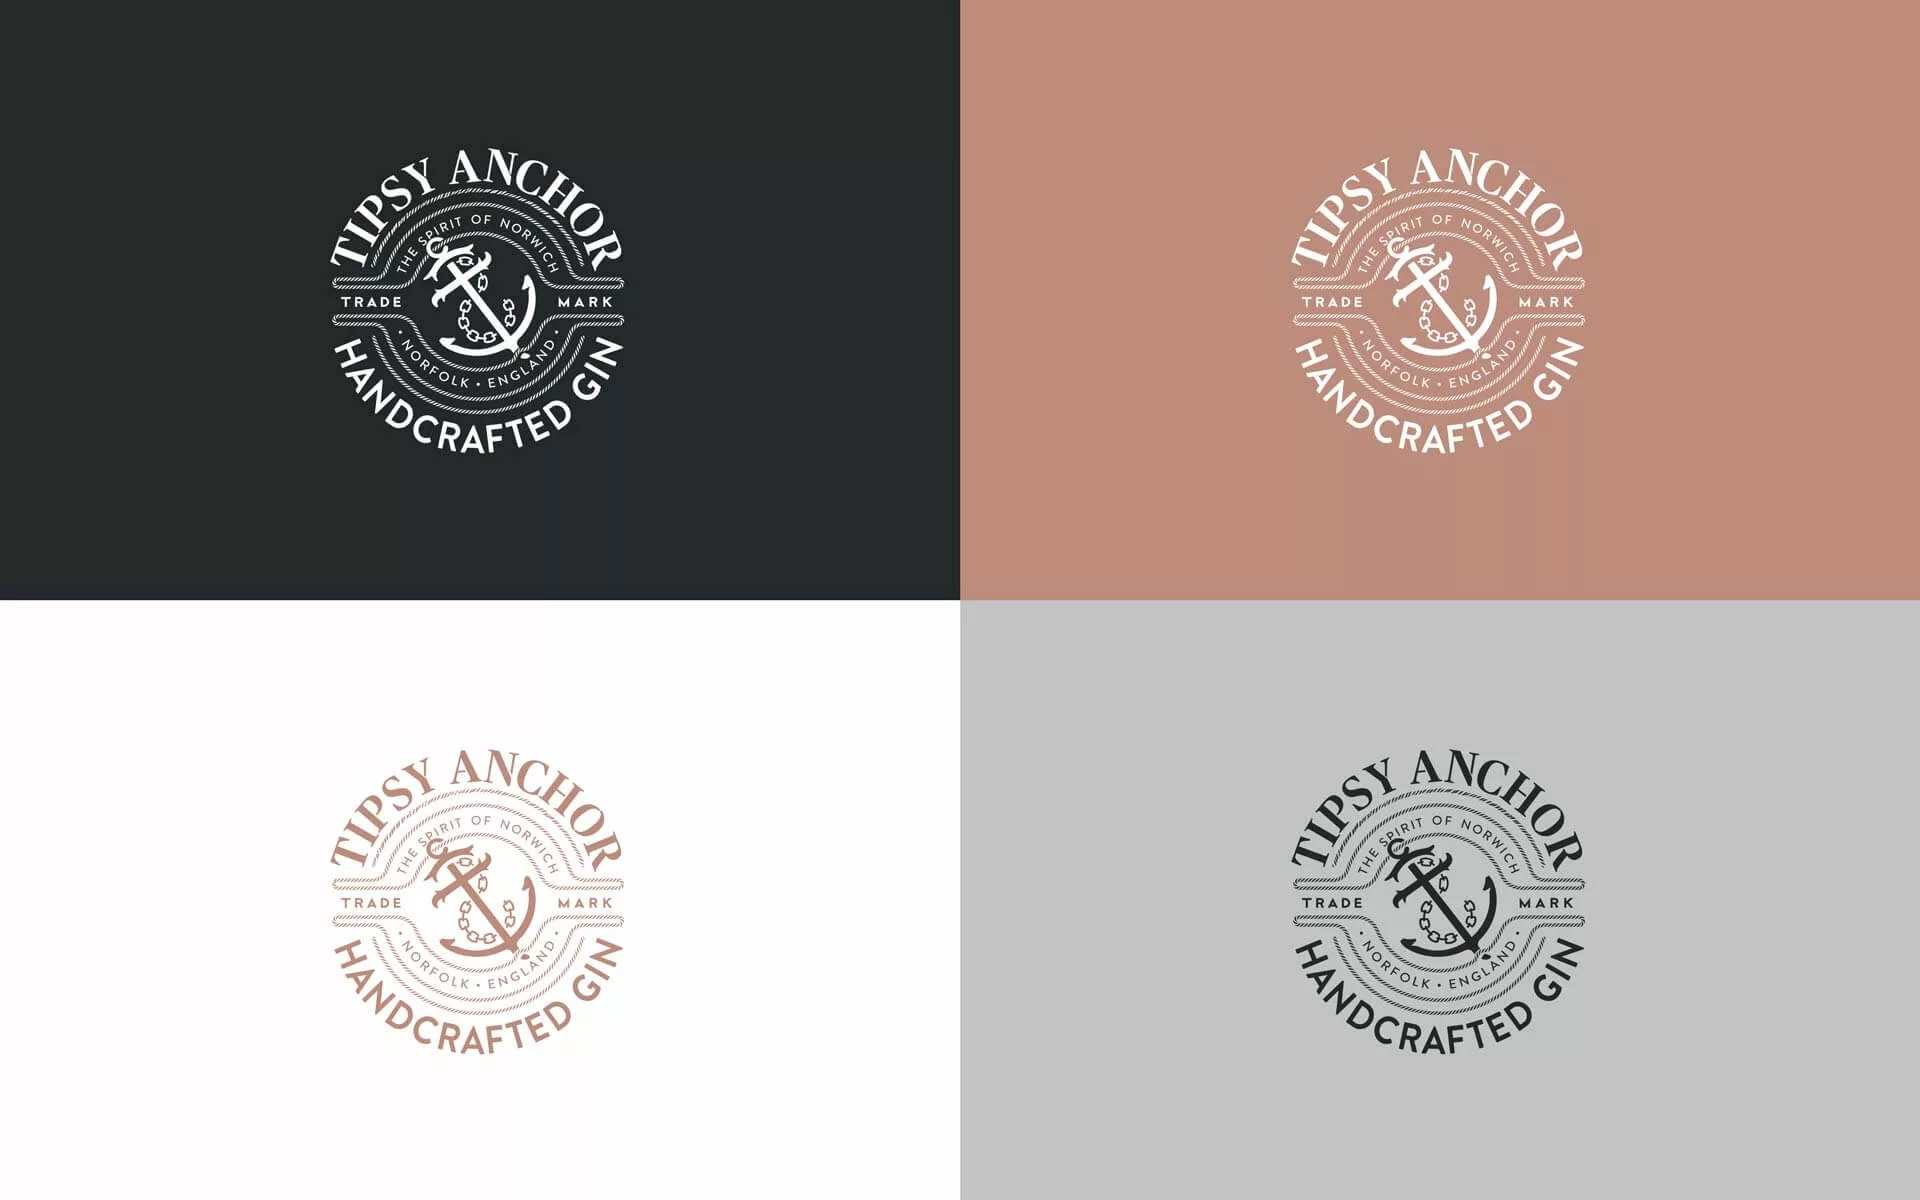 4 variations of the Bullards logo on different coloured backgrounds